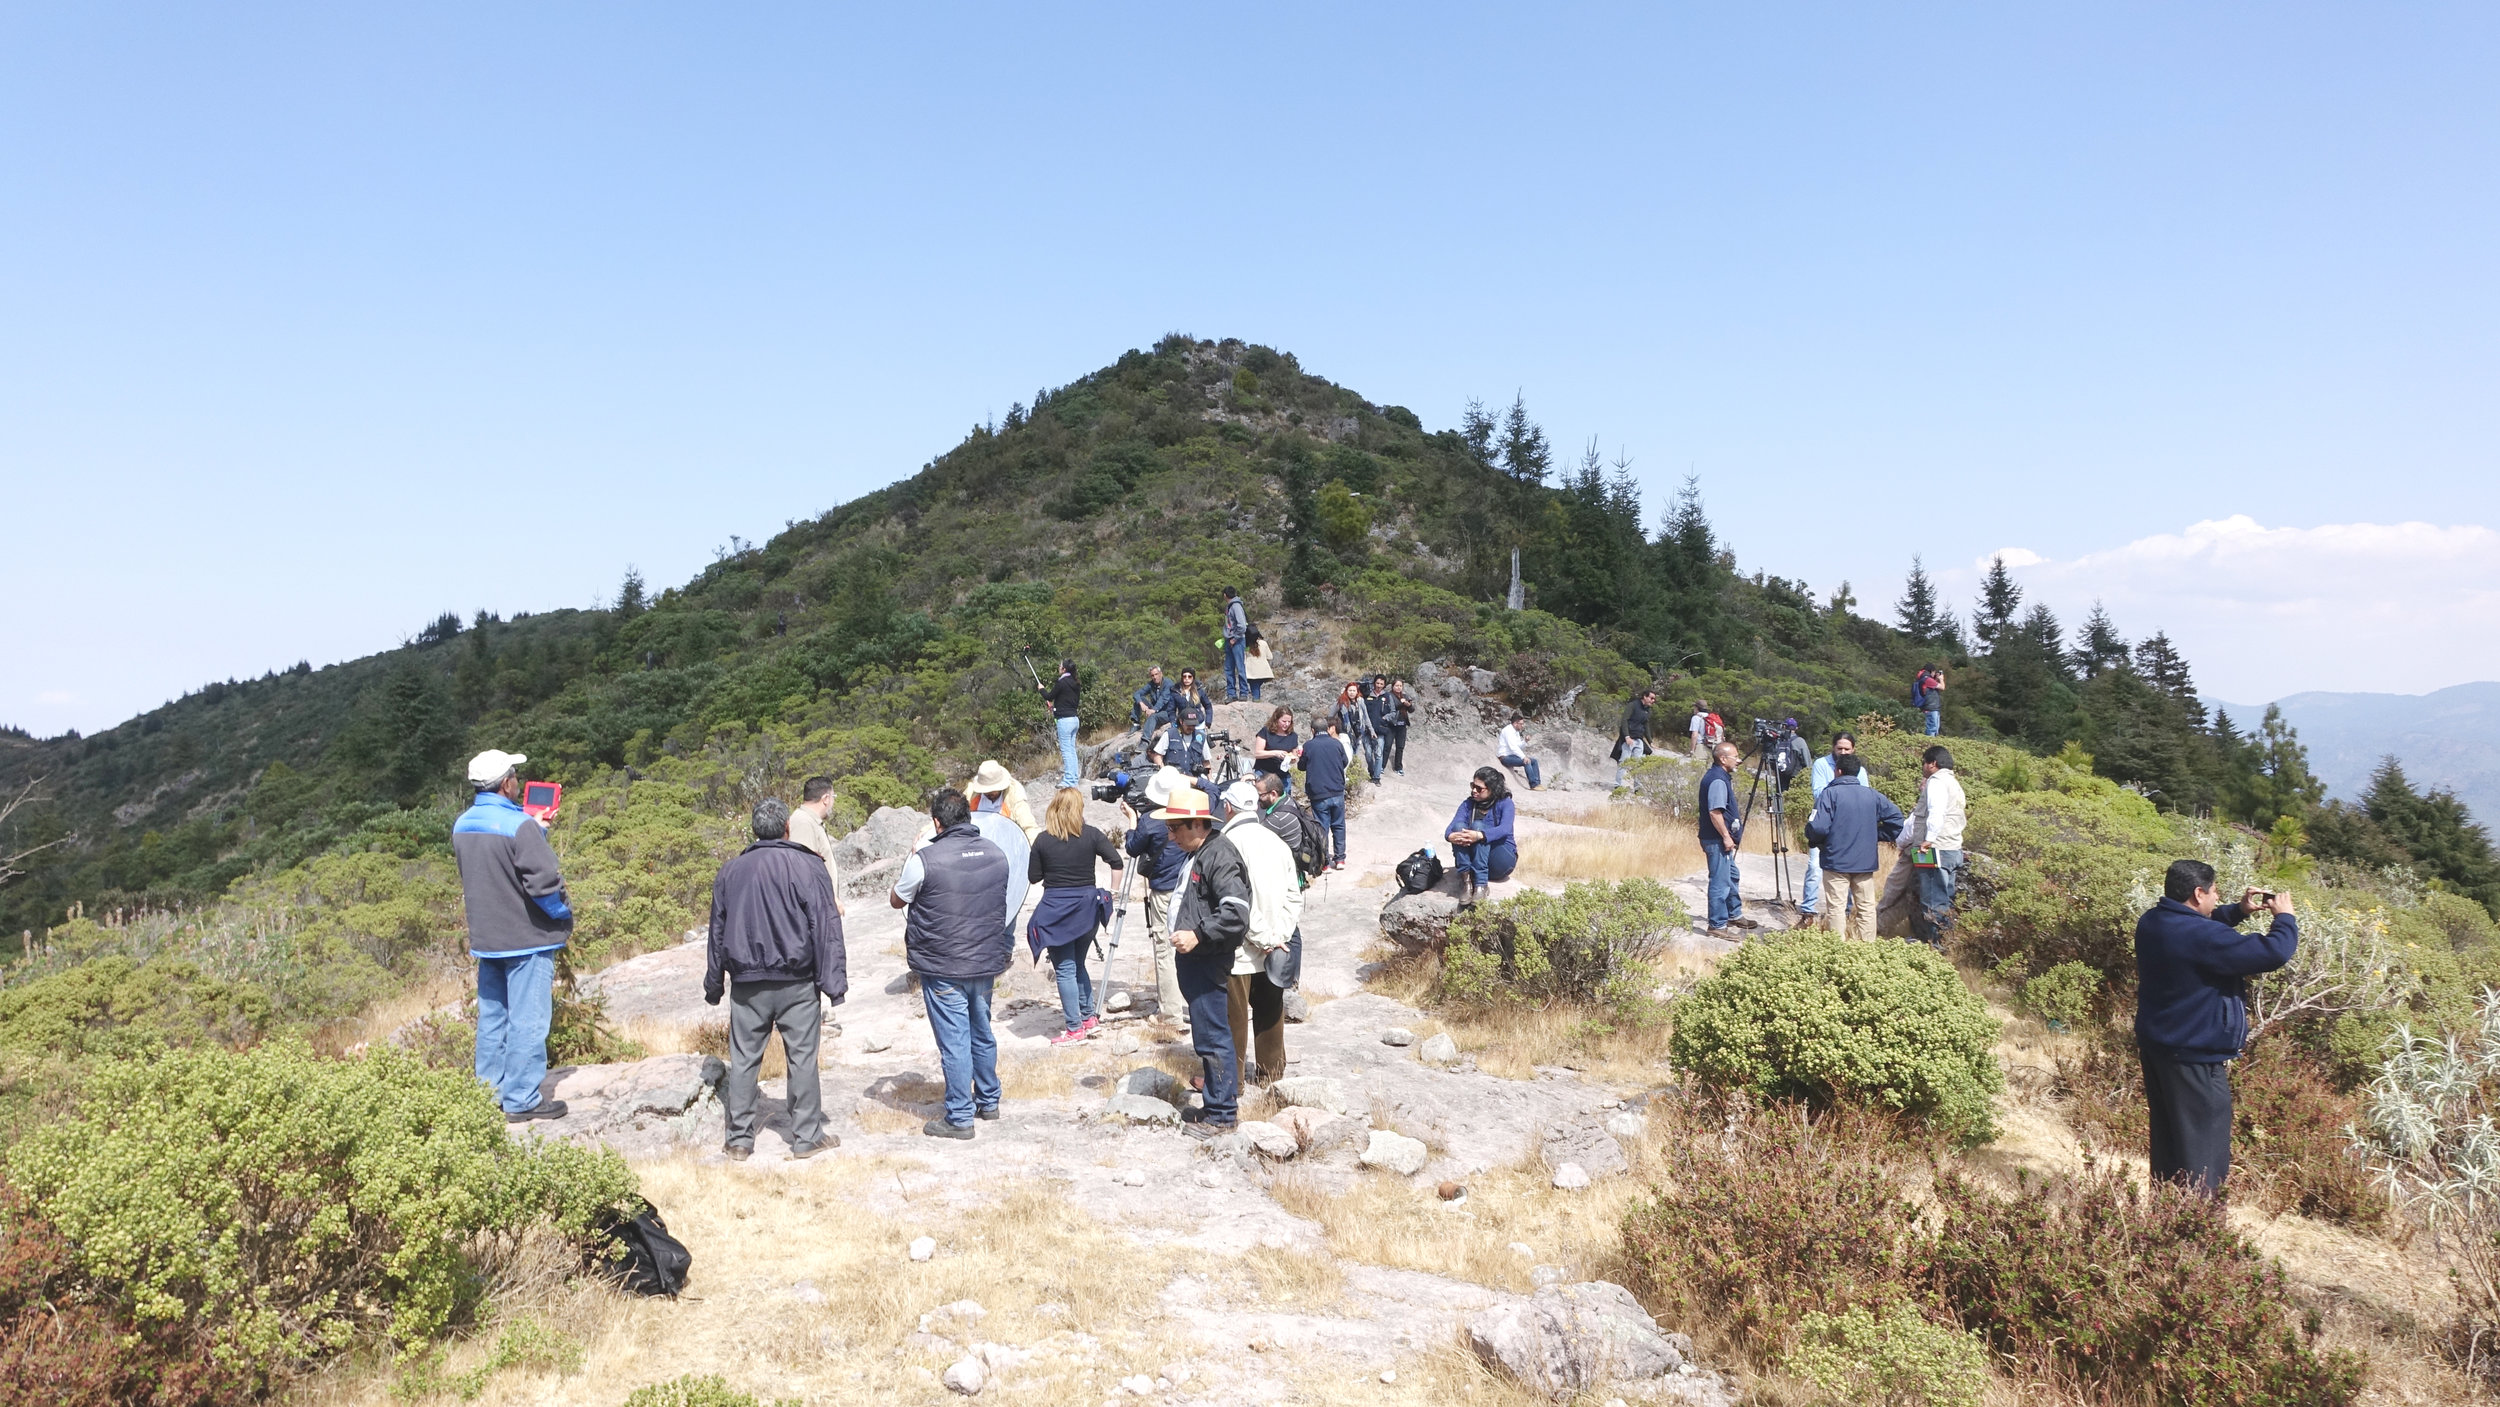 Journalists joined project leaders atop the Cero Pelon where the degradation is clearly visible